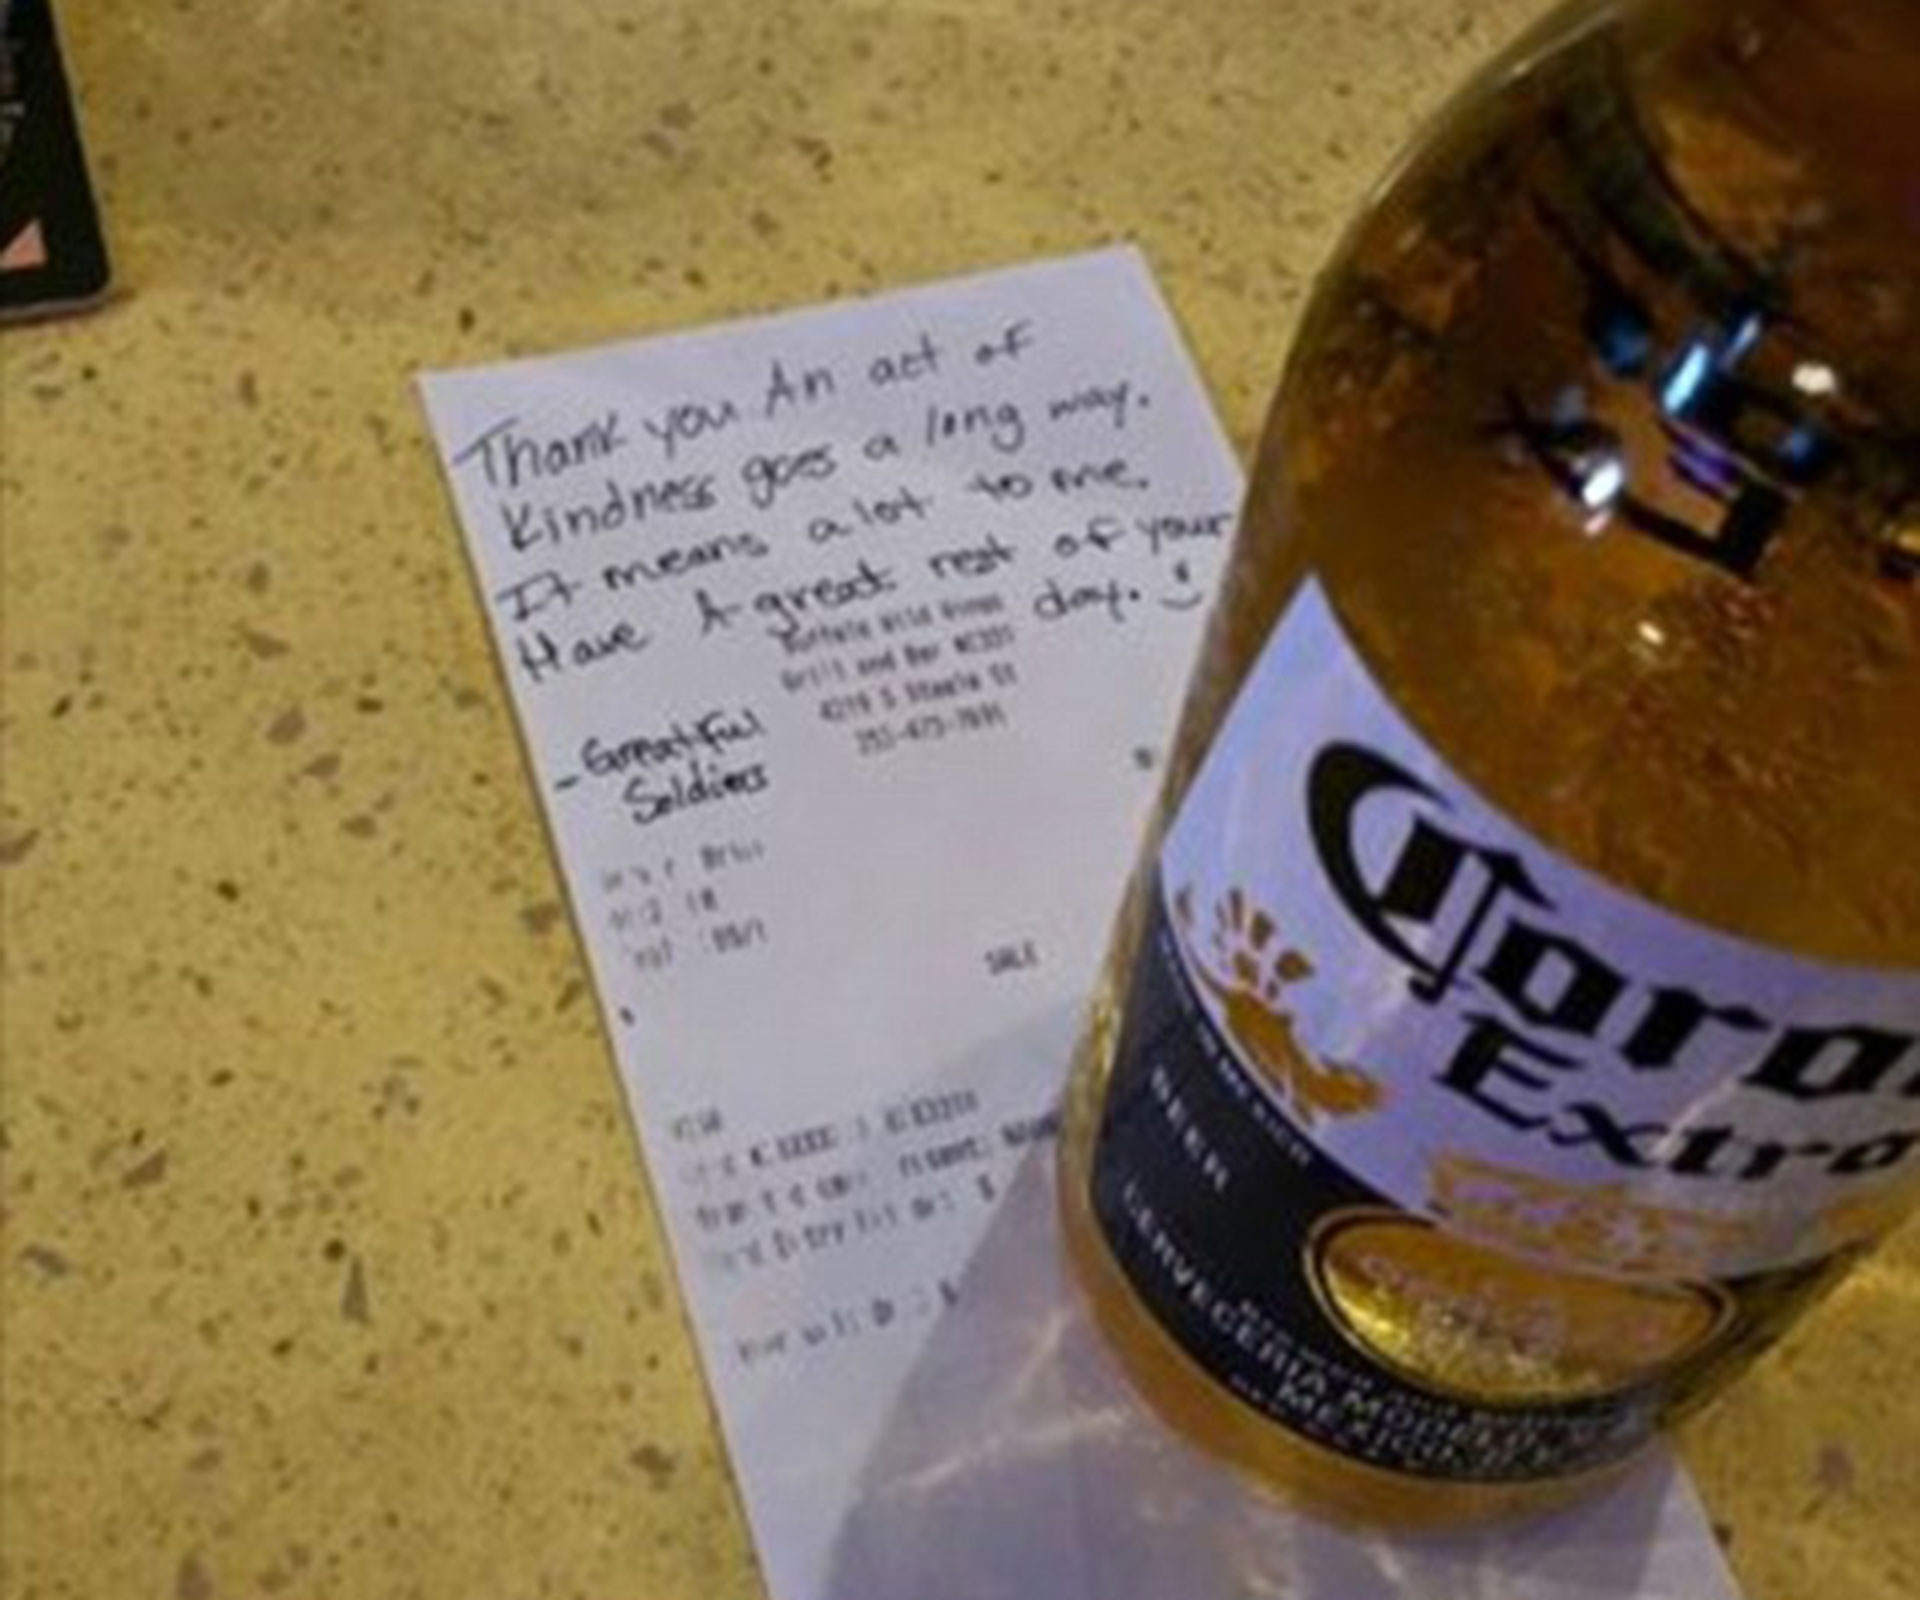 Beer on bar a touching tribute to fallen soldier